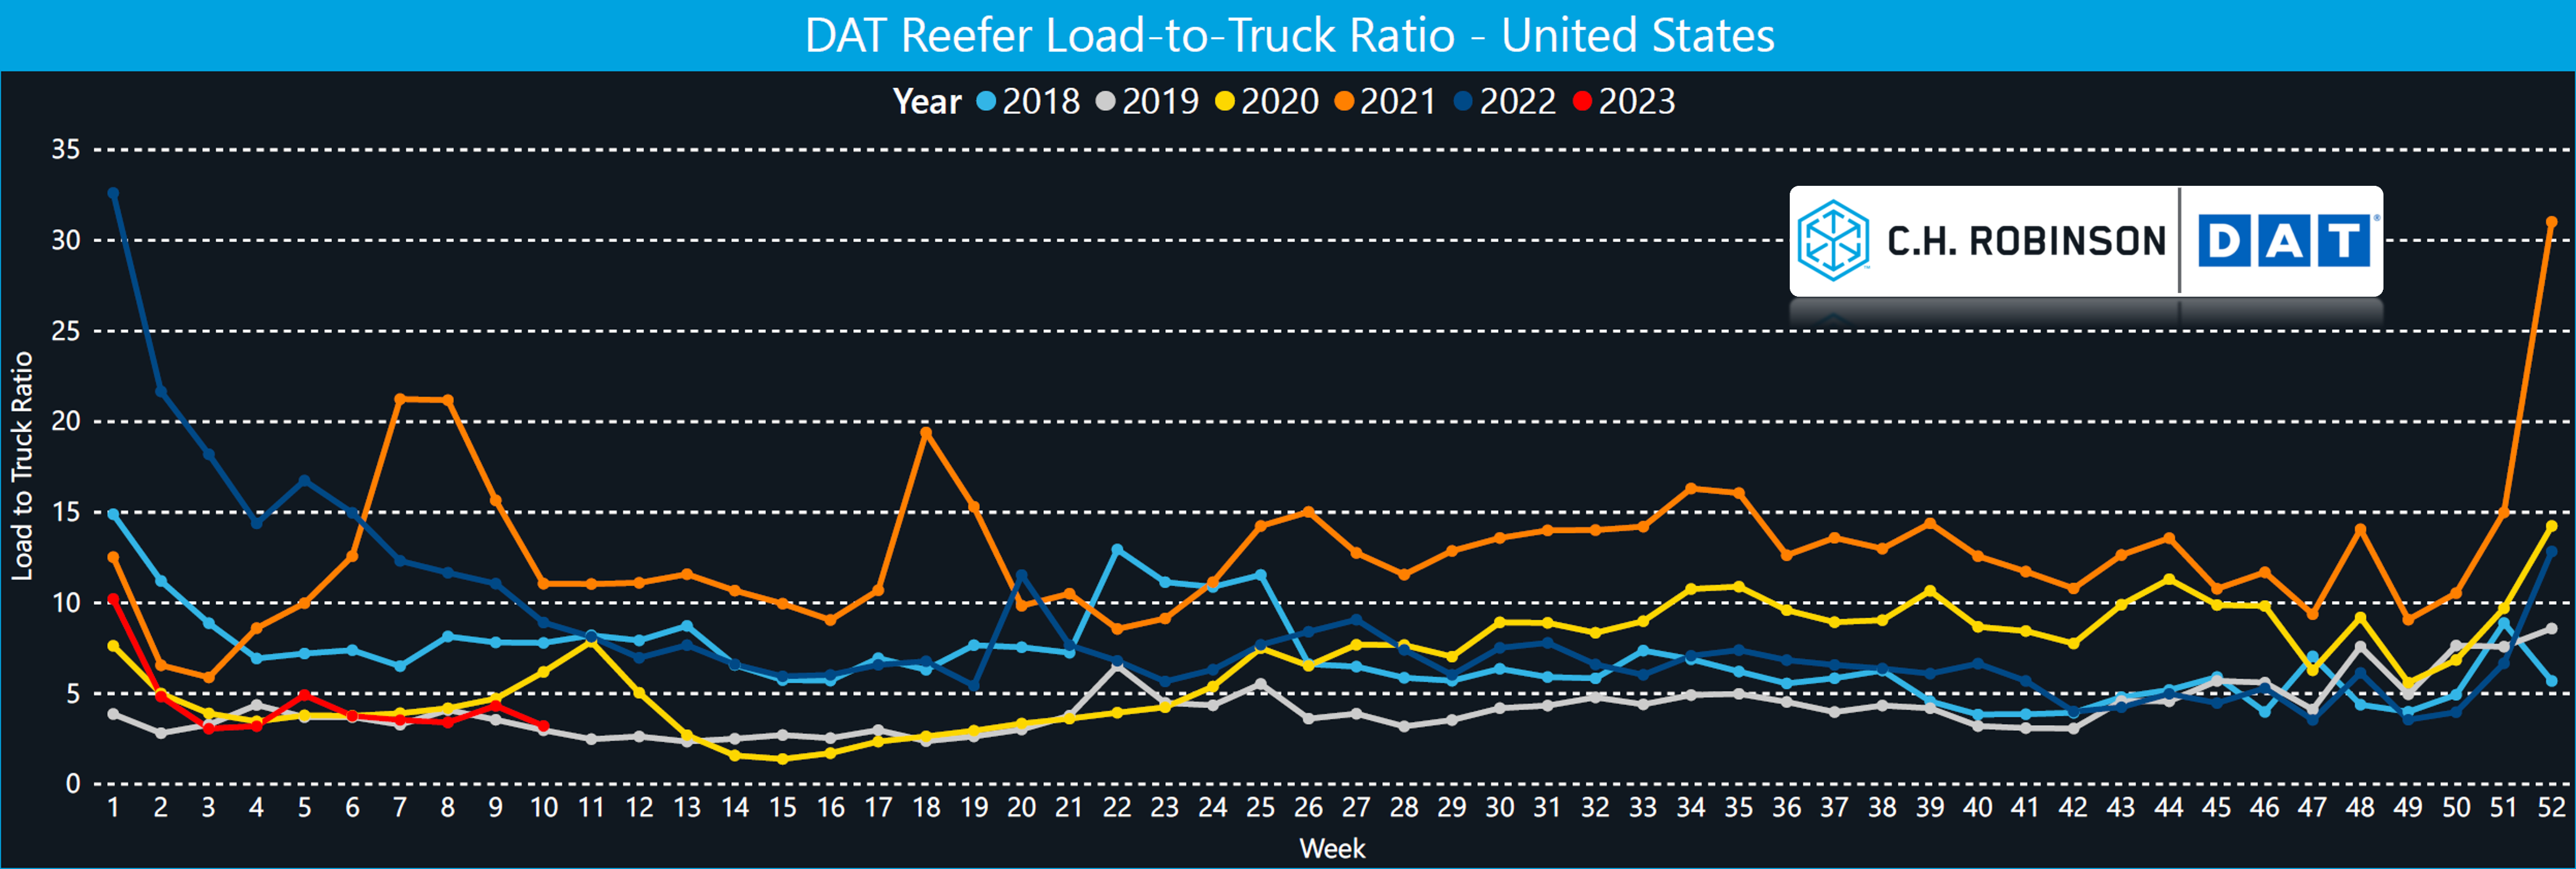 refrigerated load to truck 5 year comparison 